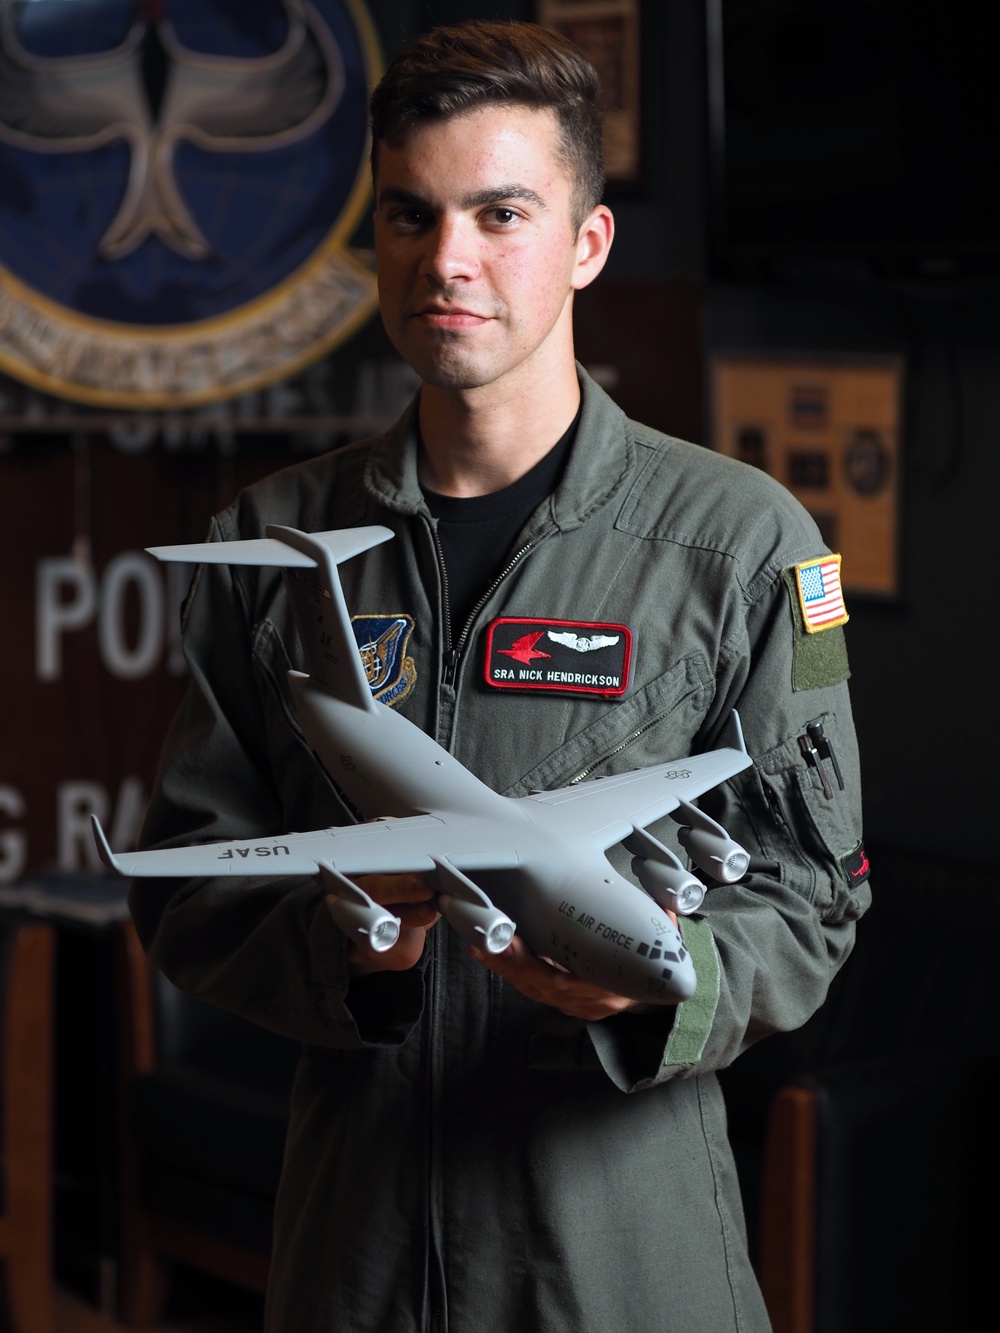 Firebirds loadmaster moves troops and cargo